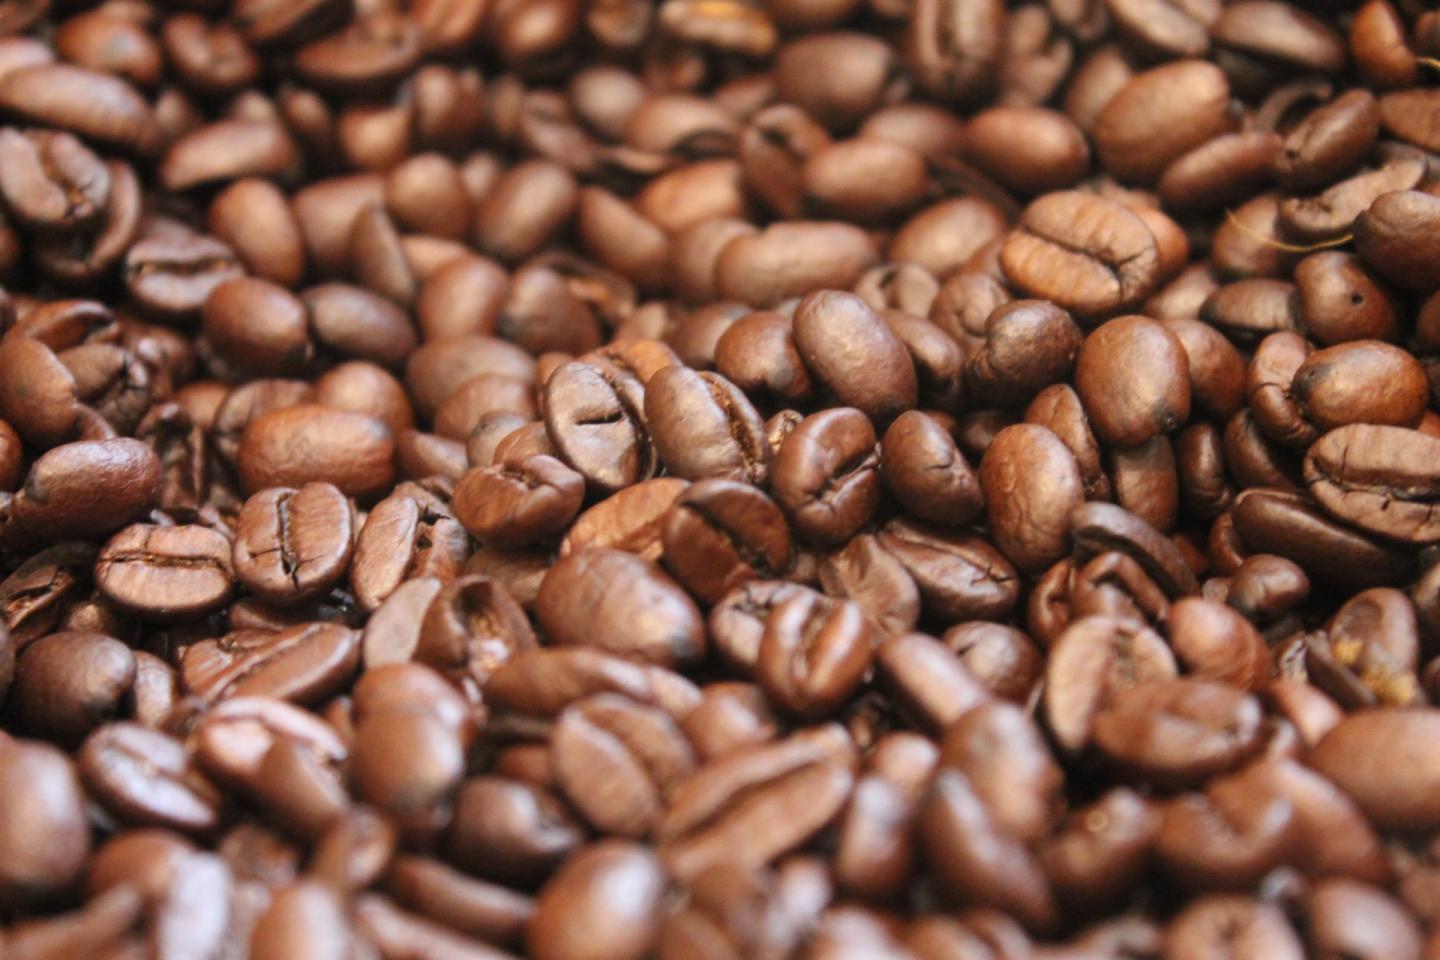 Some Commercial Coffees Contain High Levels of Mycotoxins